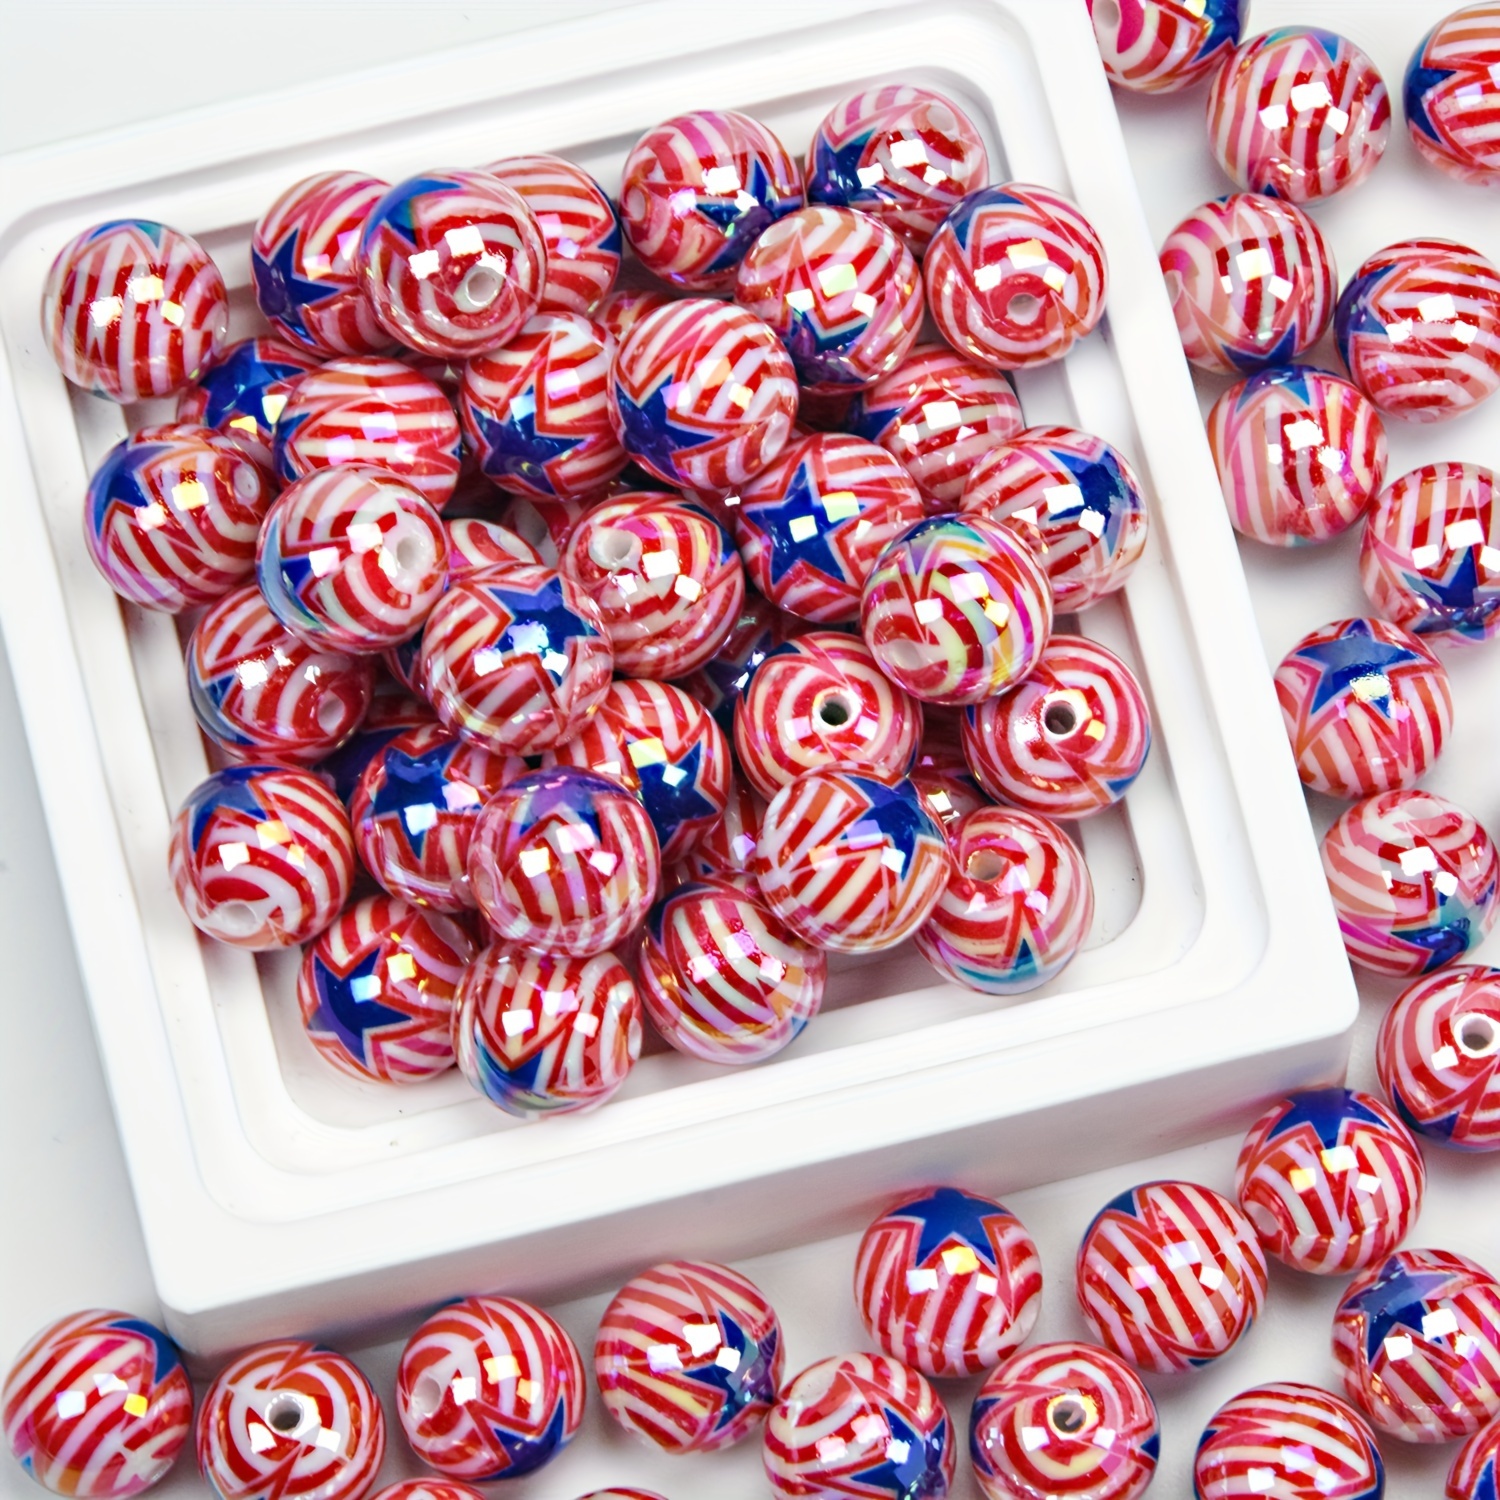 

20/40pcs Patriotic Acrylic Beads 16mm Round With Straight Holes, Uv Coated Scratch-resistant Electroplated Beads For Diy Bracelet, Pens, And Decorative Crafts - Independence Day Themed